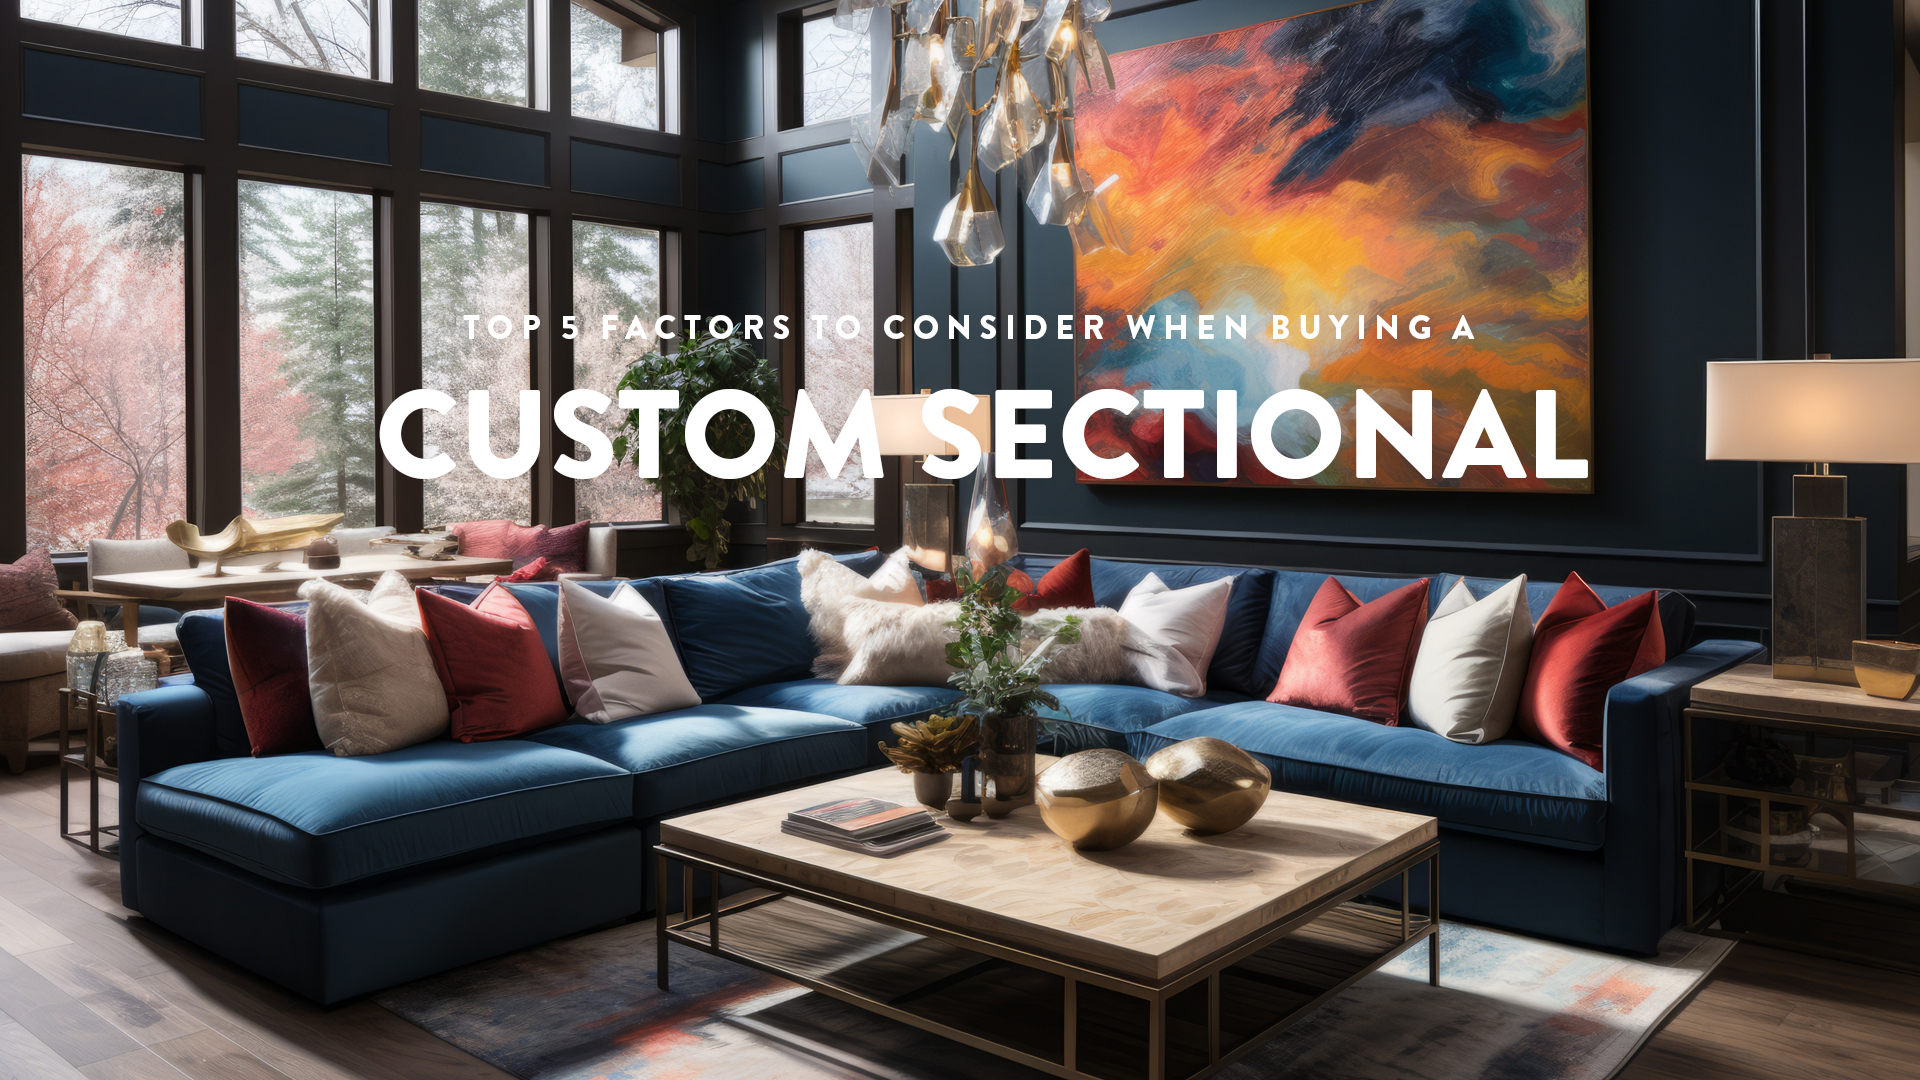 Top 5 Factors to Consider When Purchasing a Custom Sectional